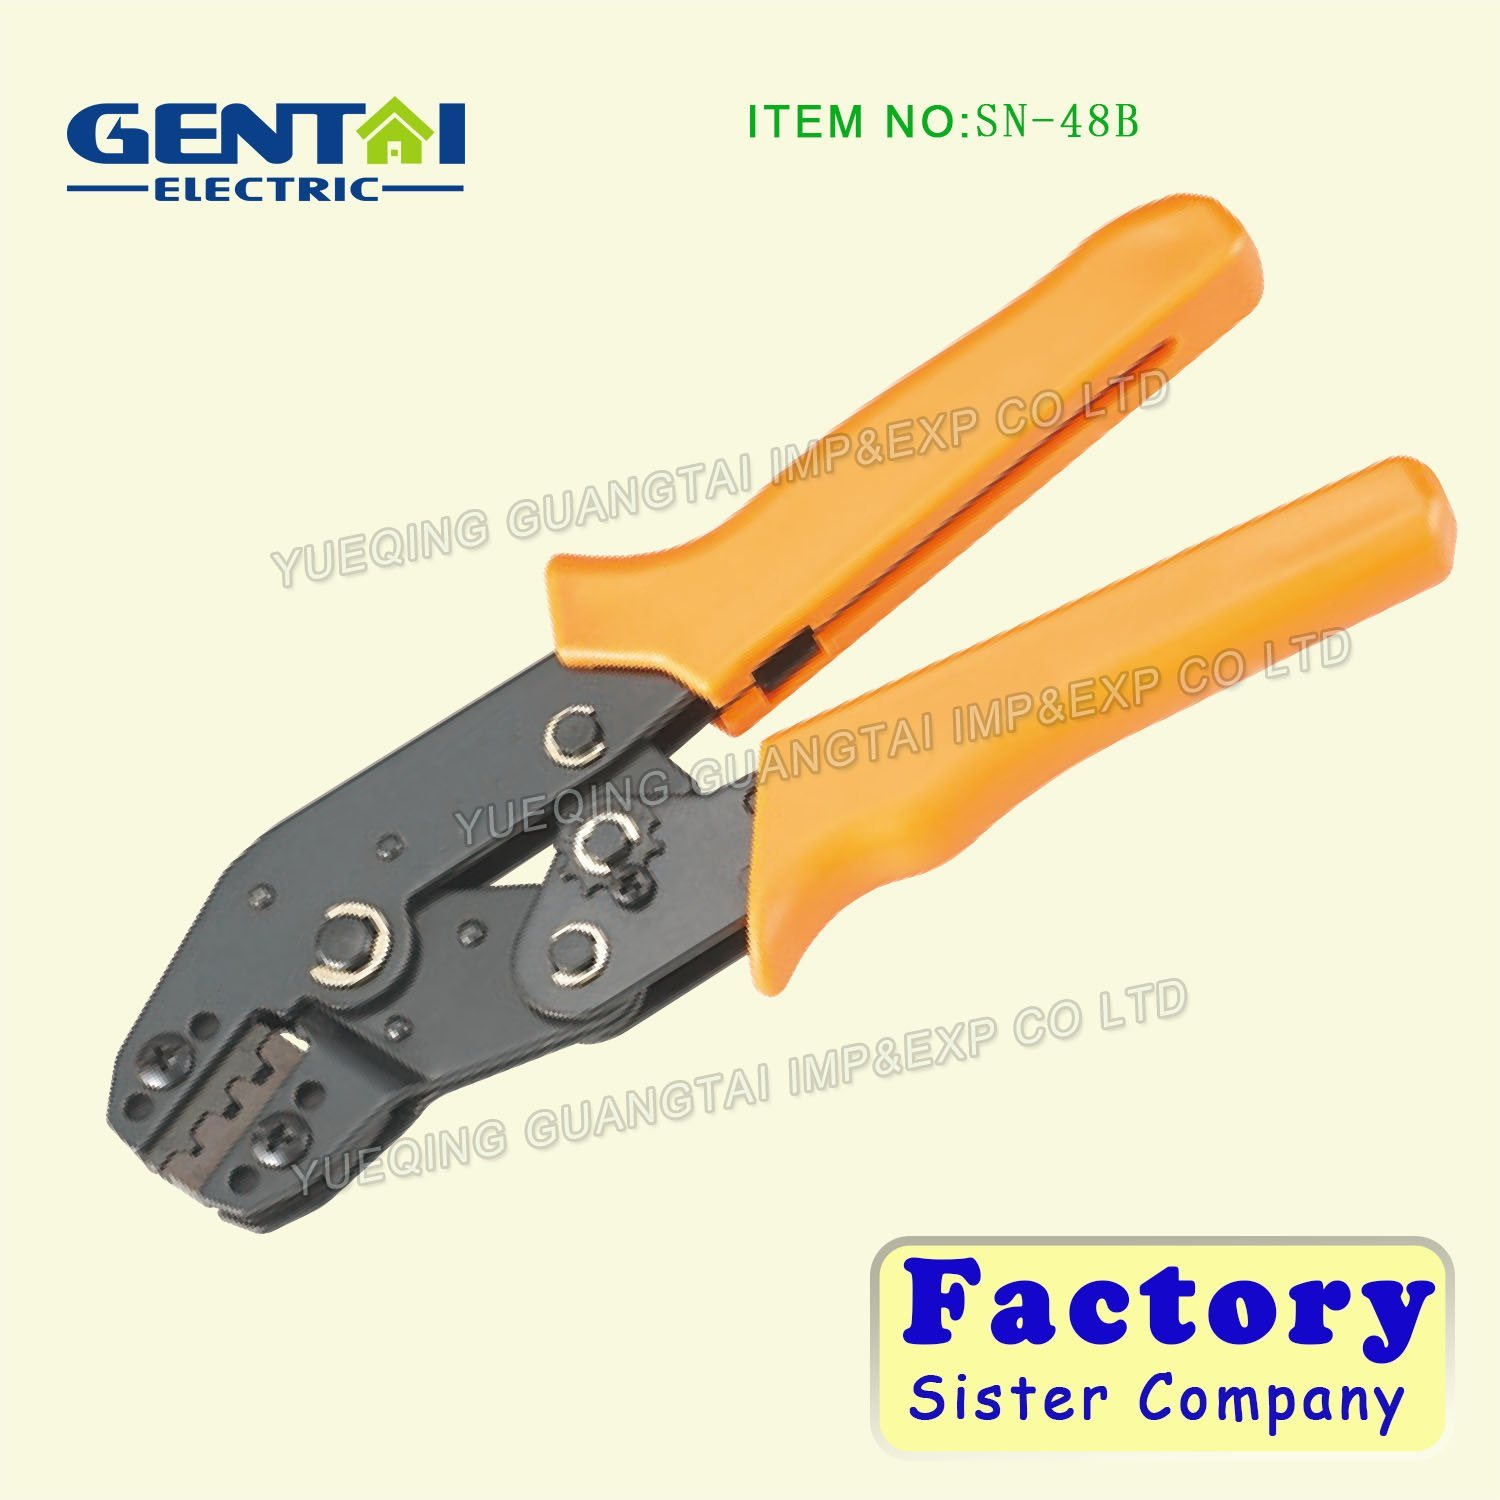 Multi Function Crimping Pliers for Crimping Non-Insulated Terminals